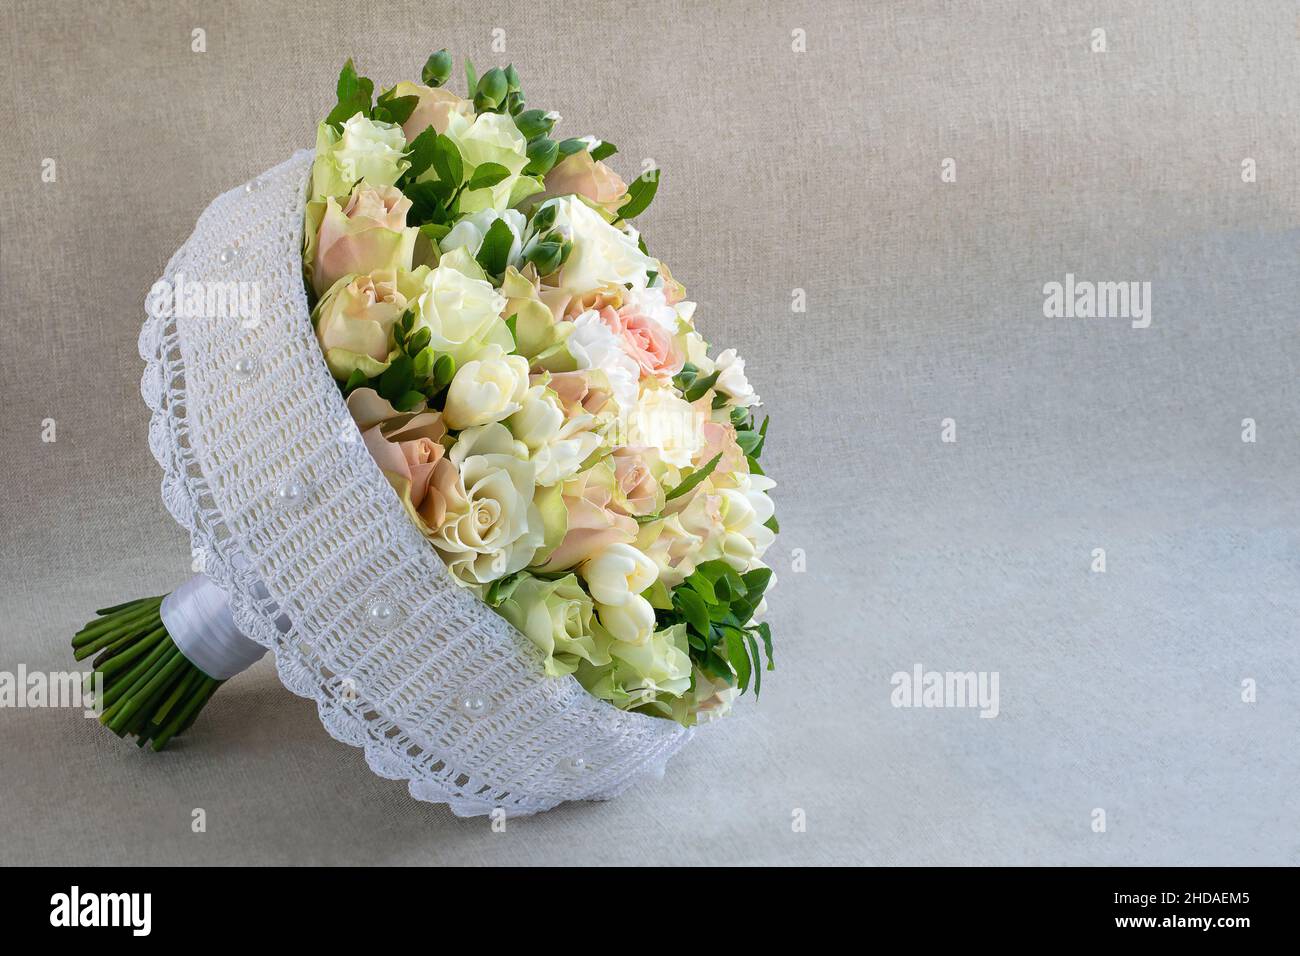 Round bridal bouquet on a handmade frame on a light background Stock Photo